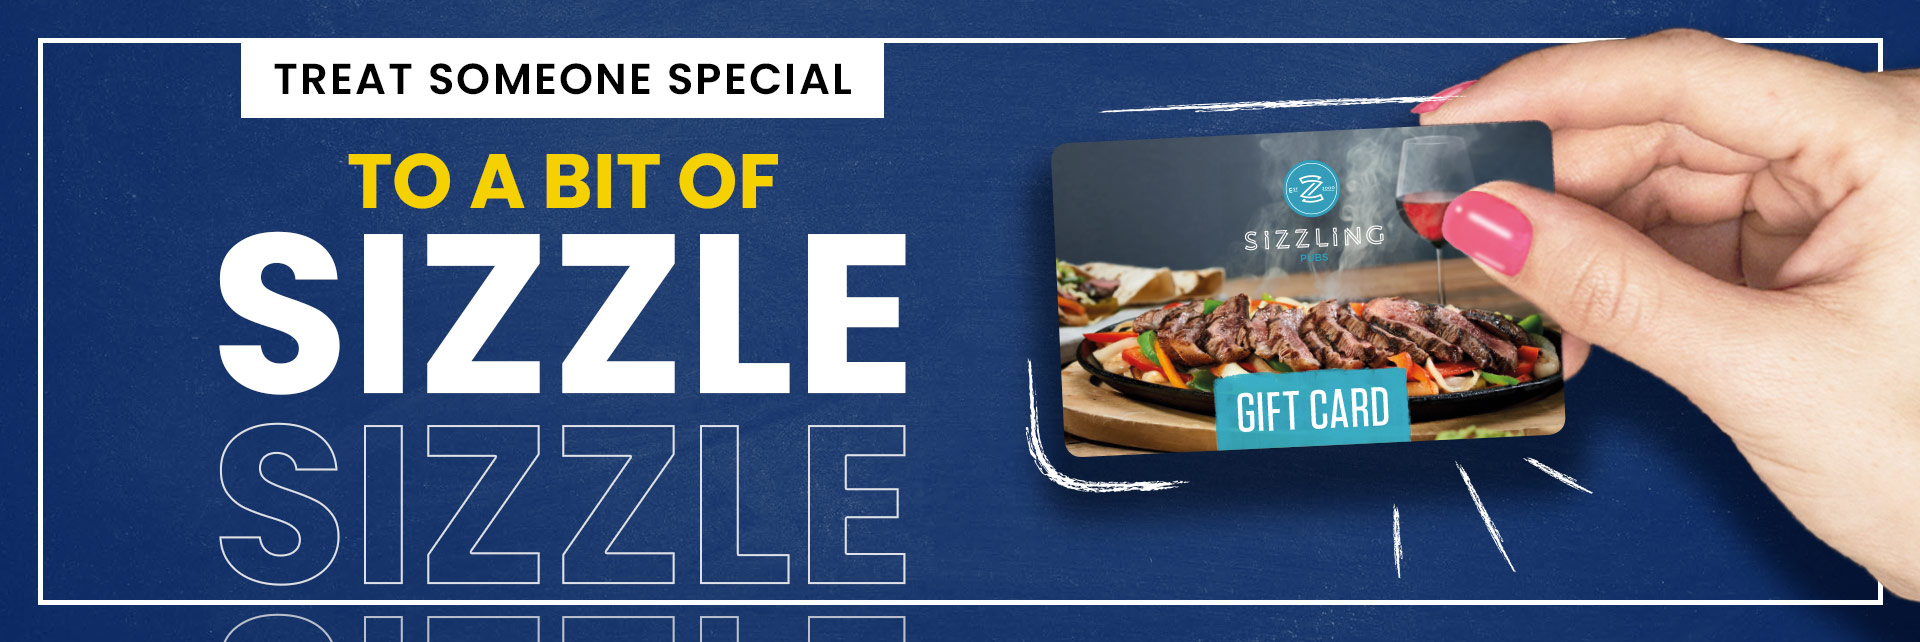 Sizzling Pubs Gift Card at The Craigmarloch in Glasgow